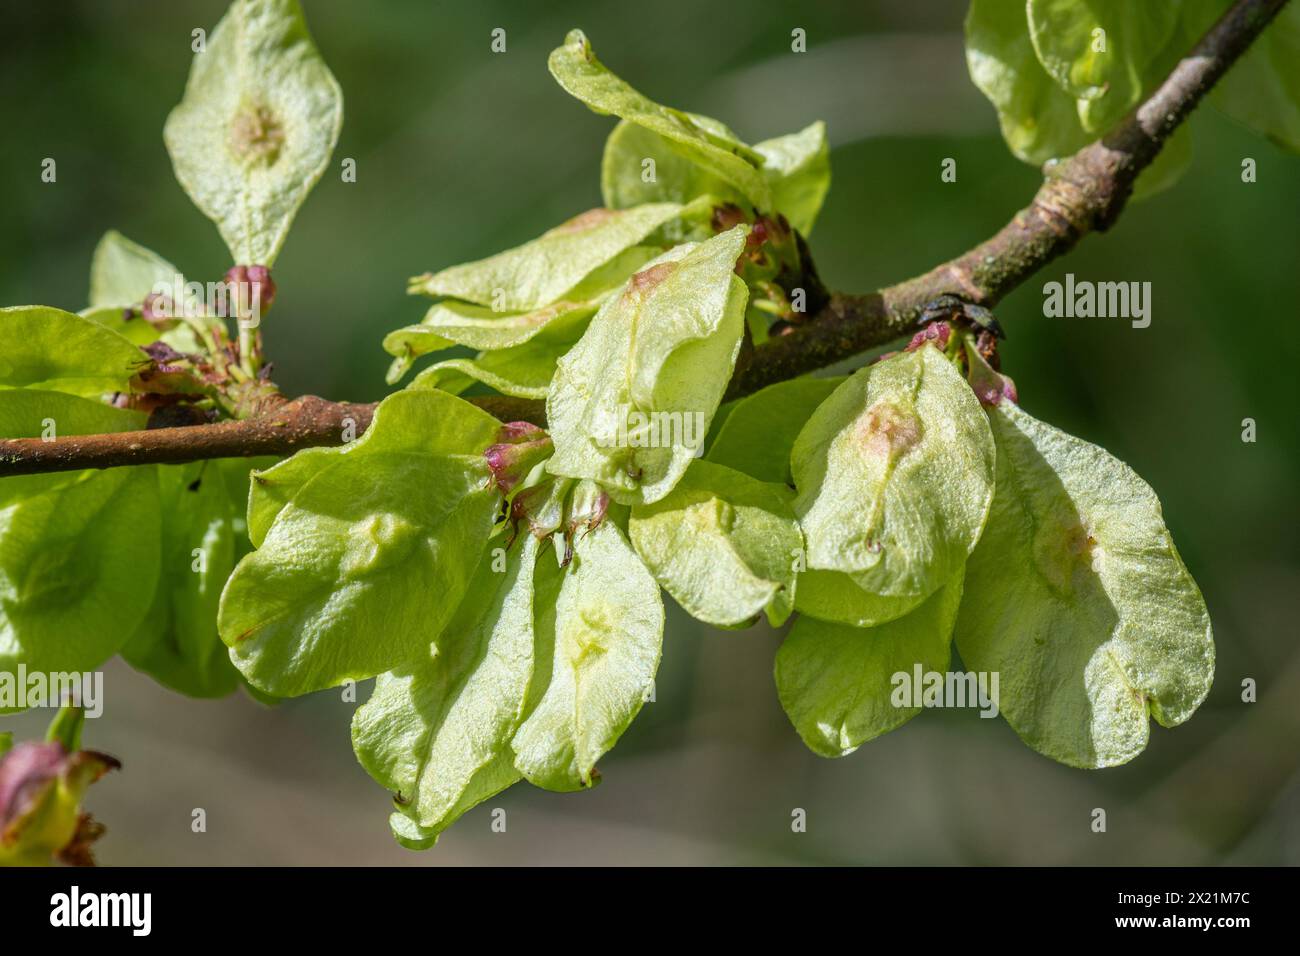 Wych elm (Ulmus glabra) tree in April or Spring with small winged fruits called samaras containing the seeds, in Hampshire woodland, England, UK Stock Photo